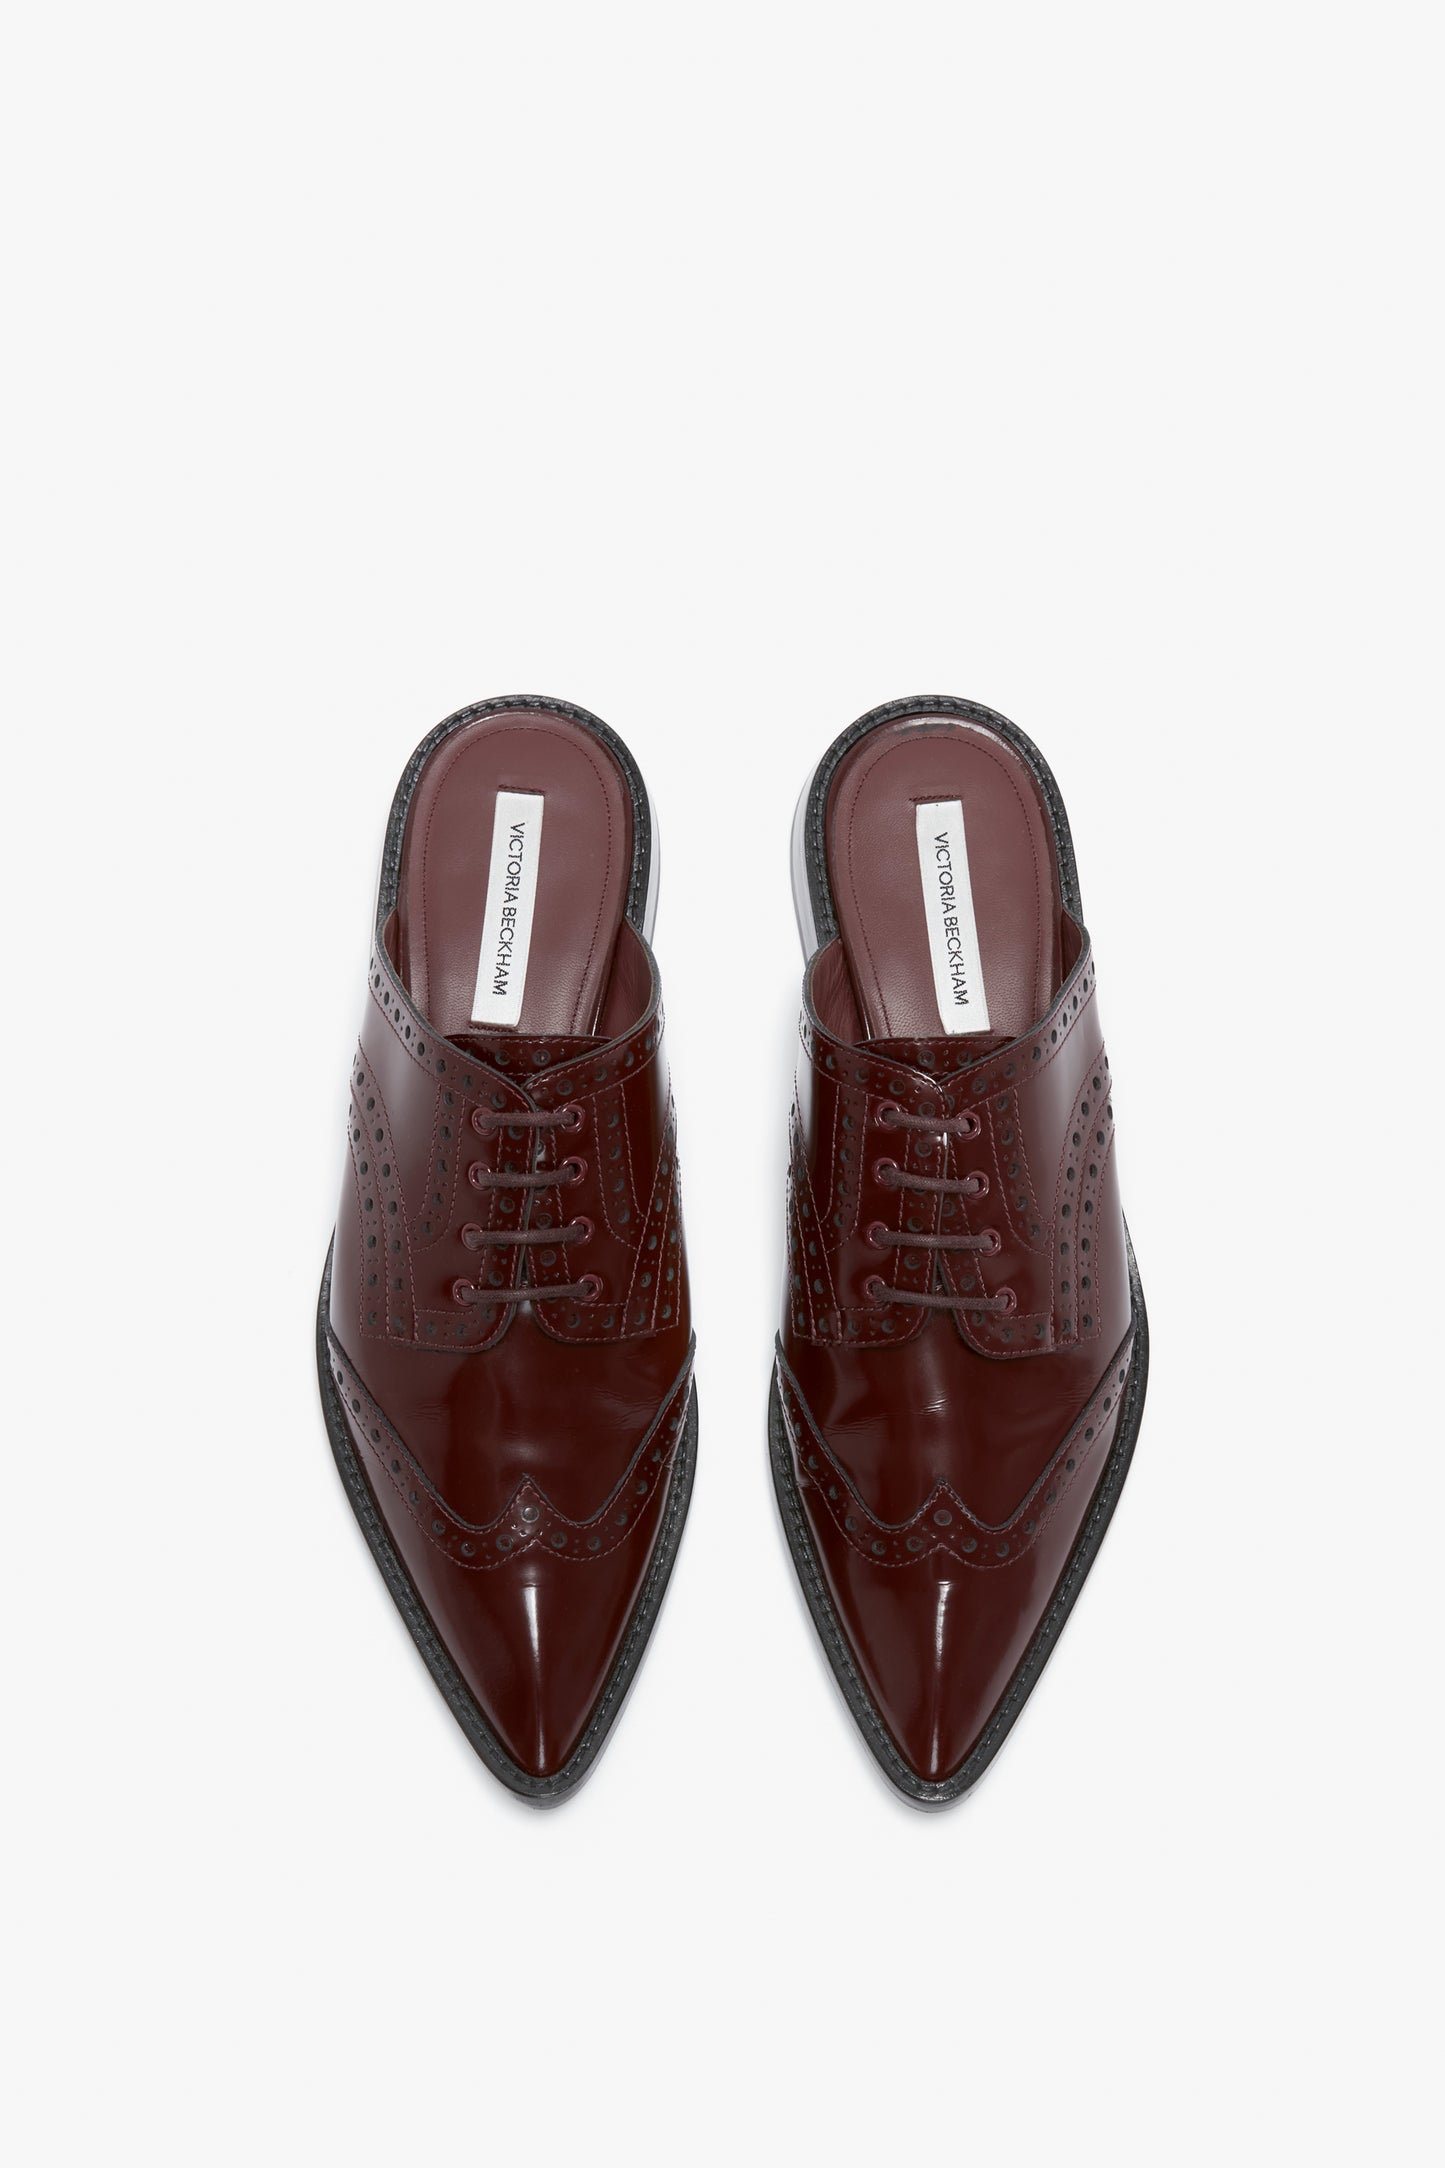 Flat Lace Up Mules In Bordeaux Leather